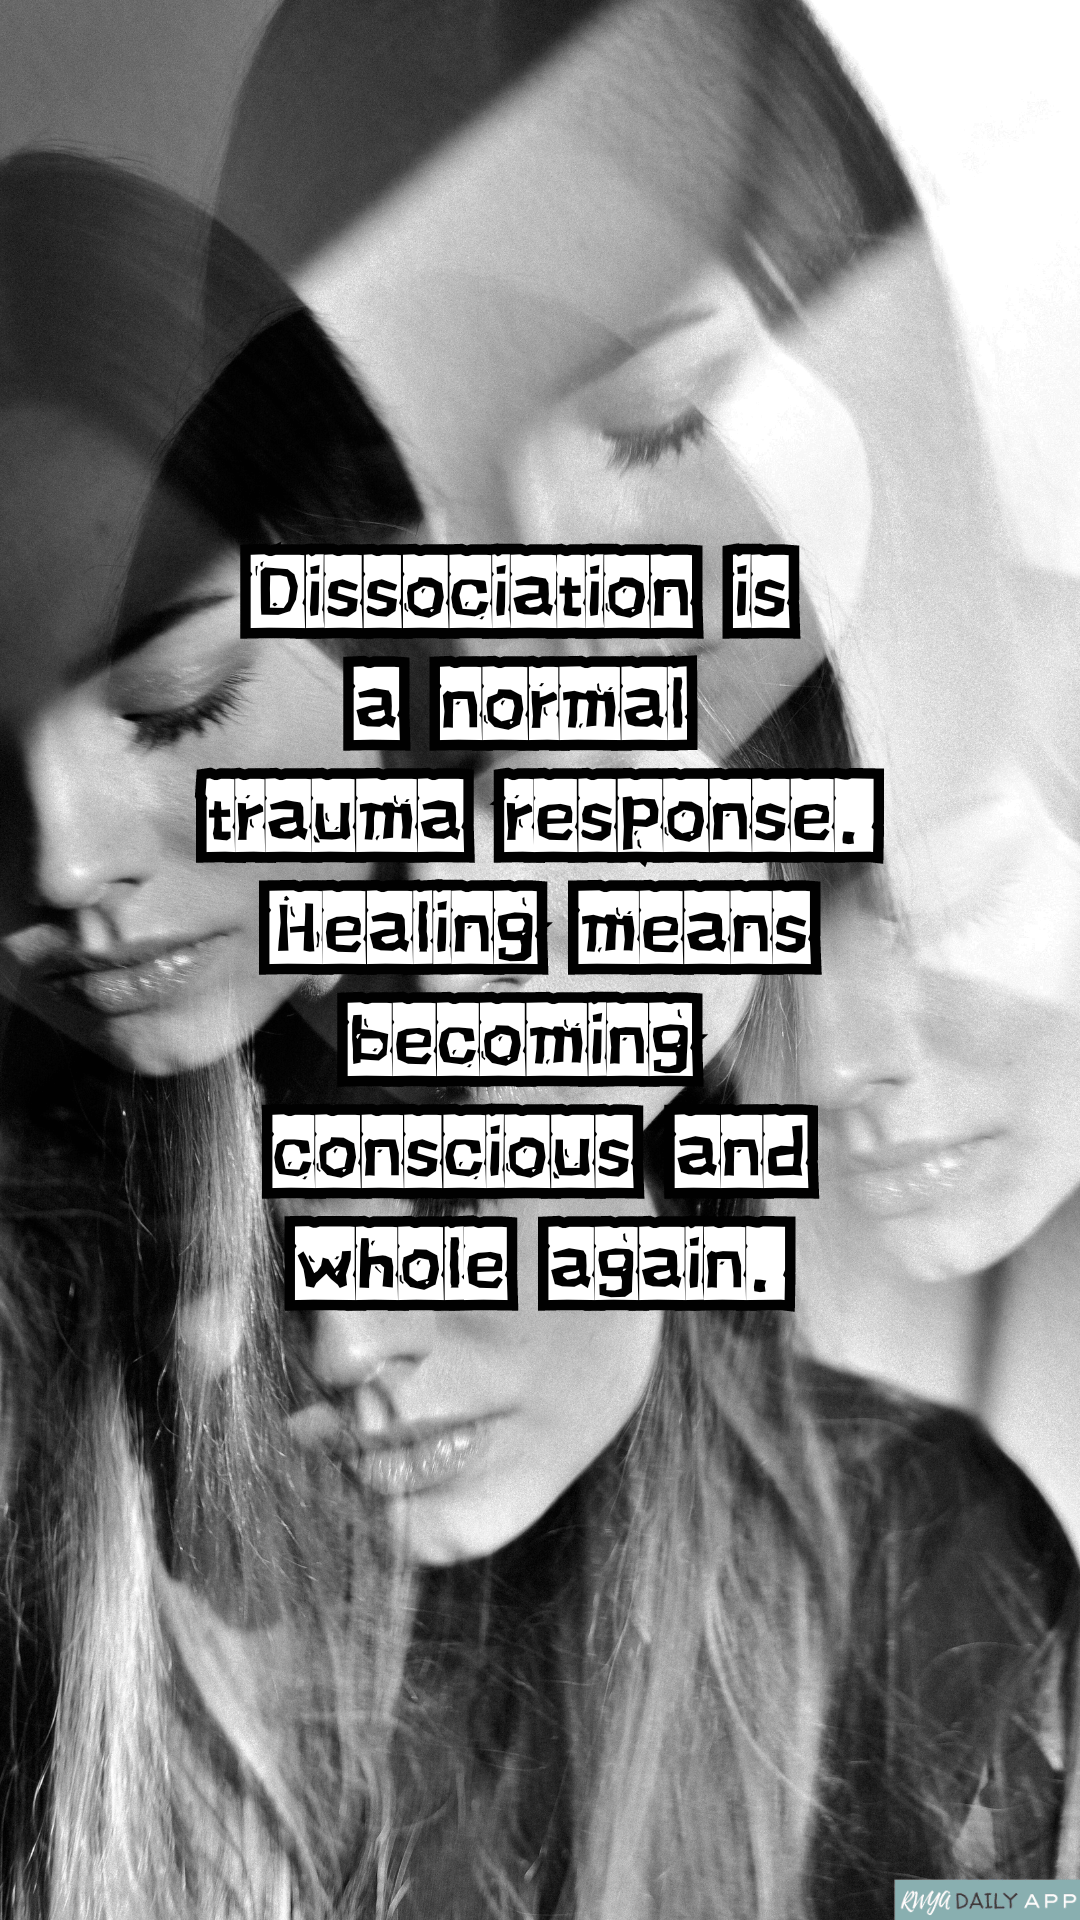 Dissociation is a normal trauma response. Healing means becoming conscious and whole again. 